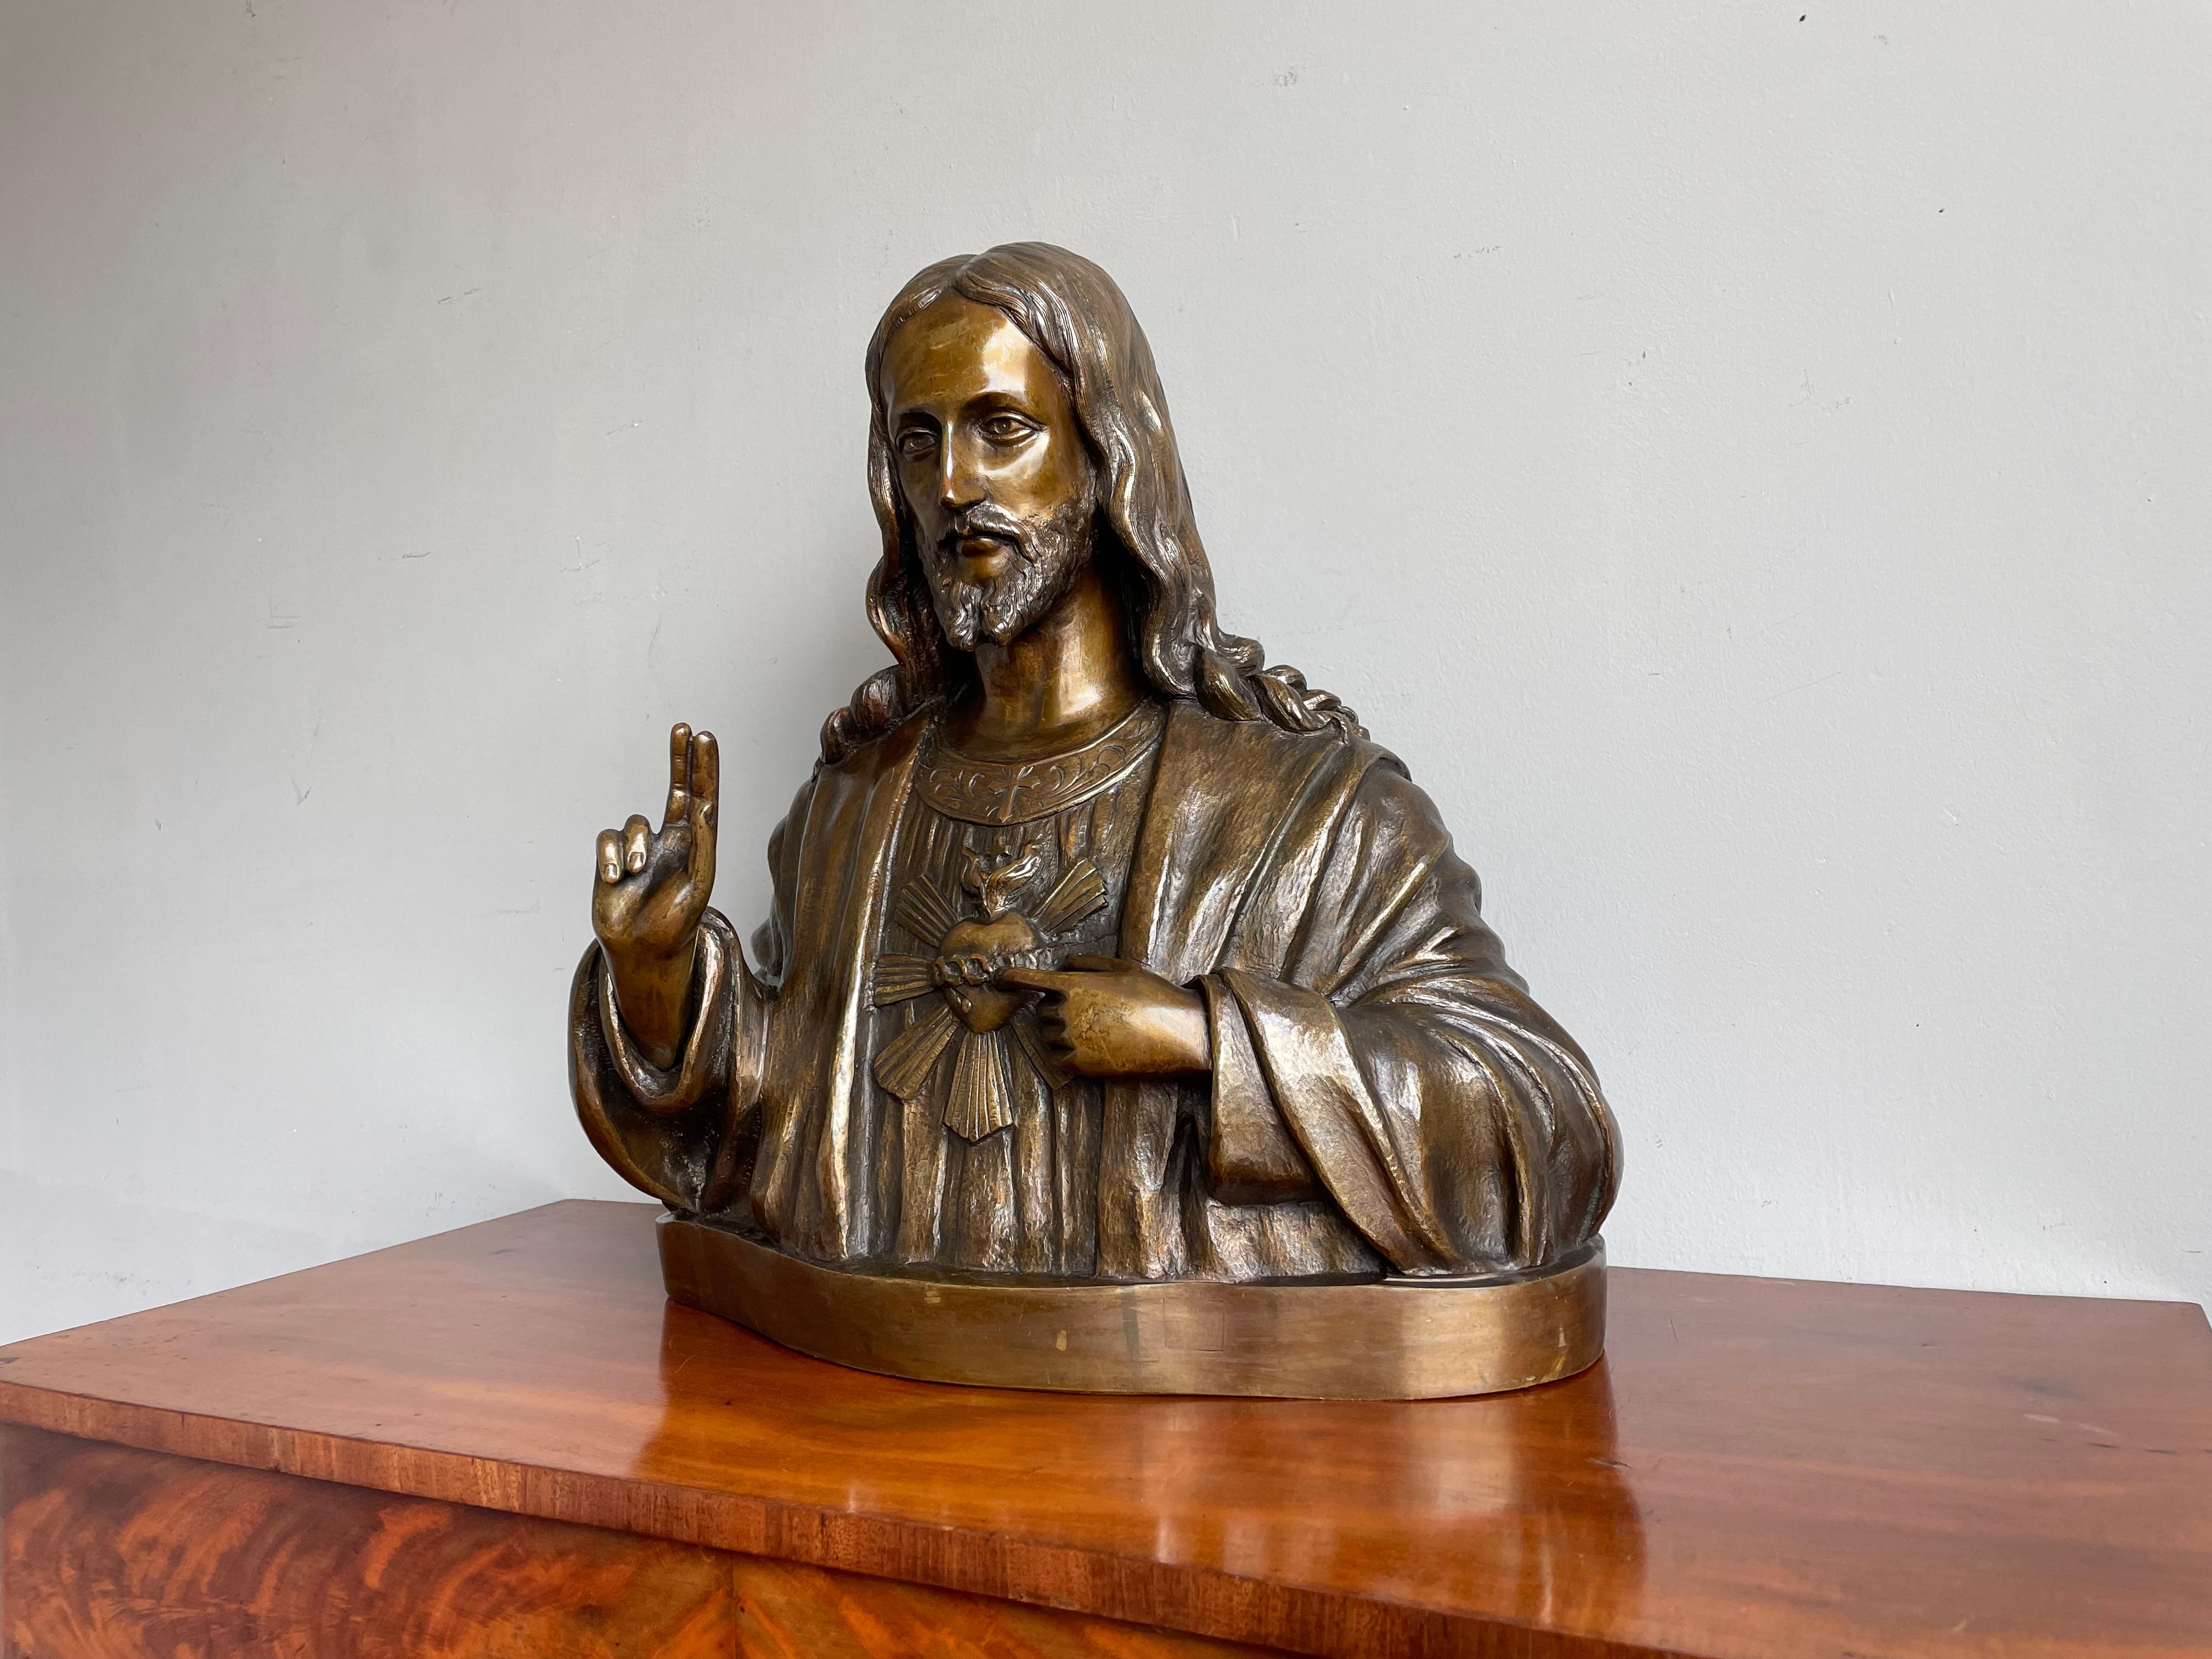 European Rare Antique Bronze Holy Heart Sculpture / Bust of Our Lord Jesus Christ 1920 For Sale